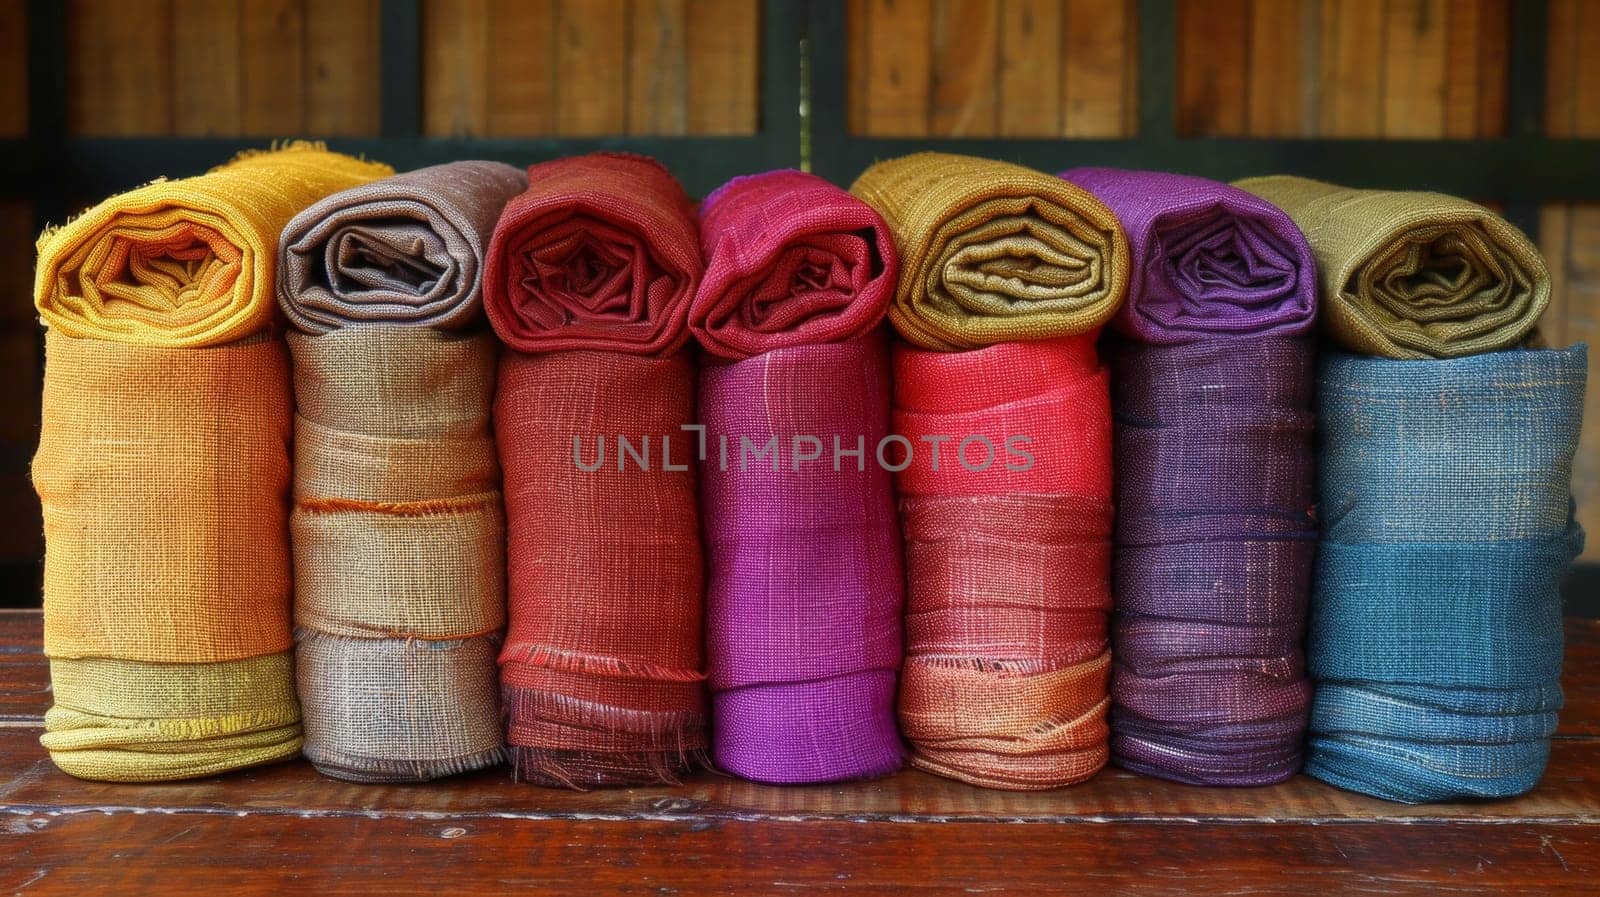 A stack of colorful cloths on a wooden table